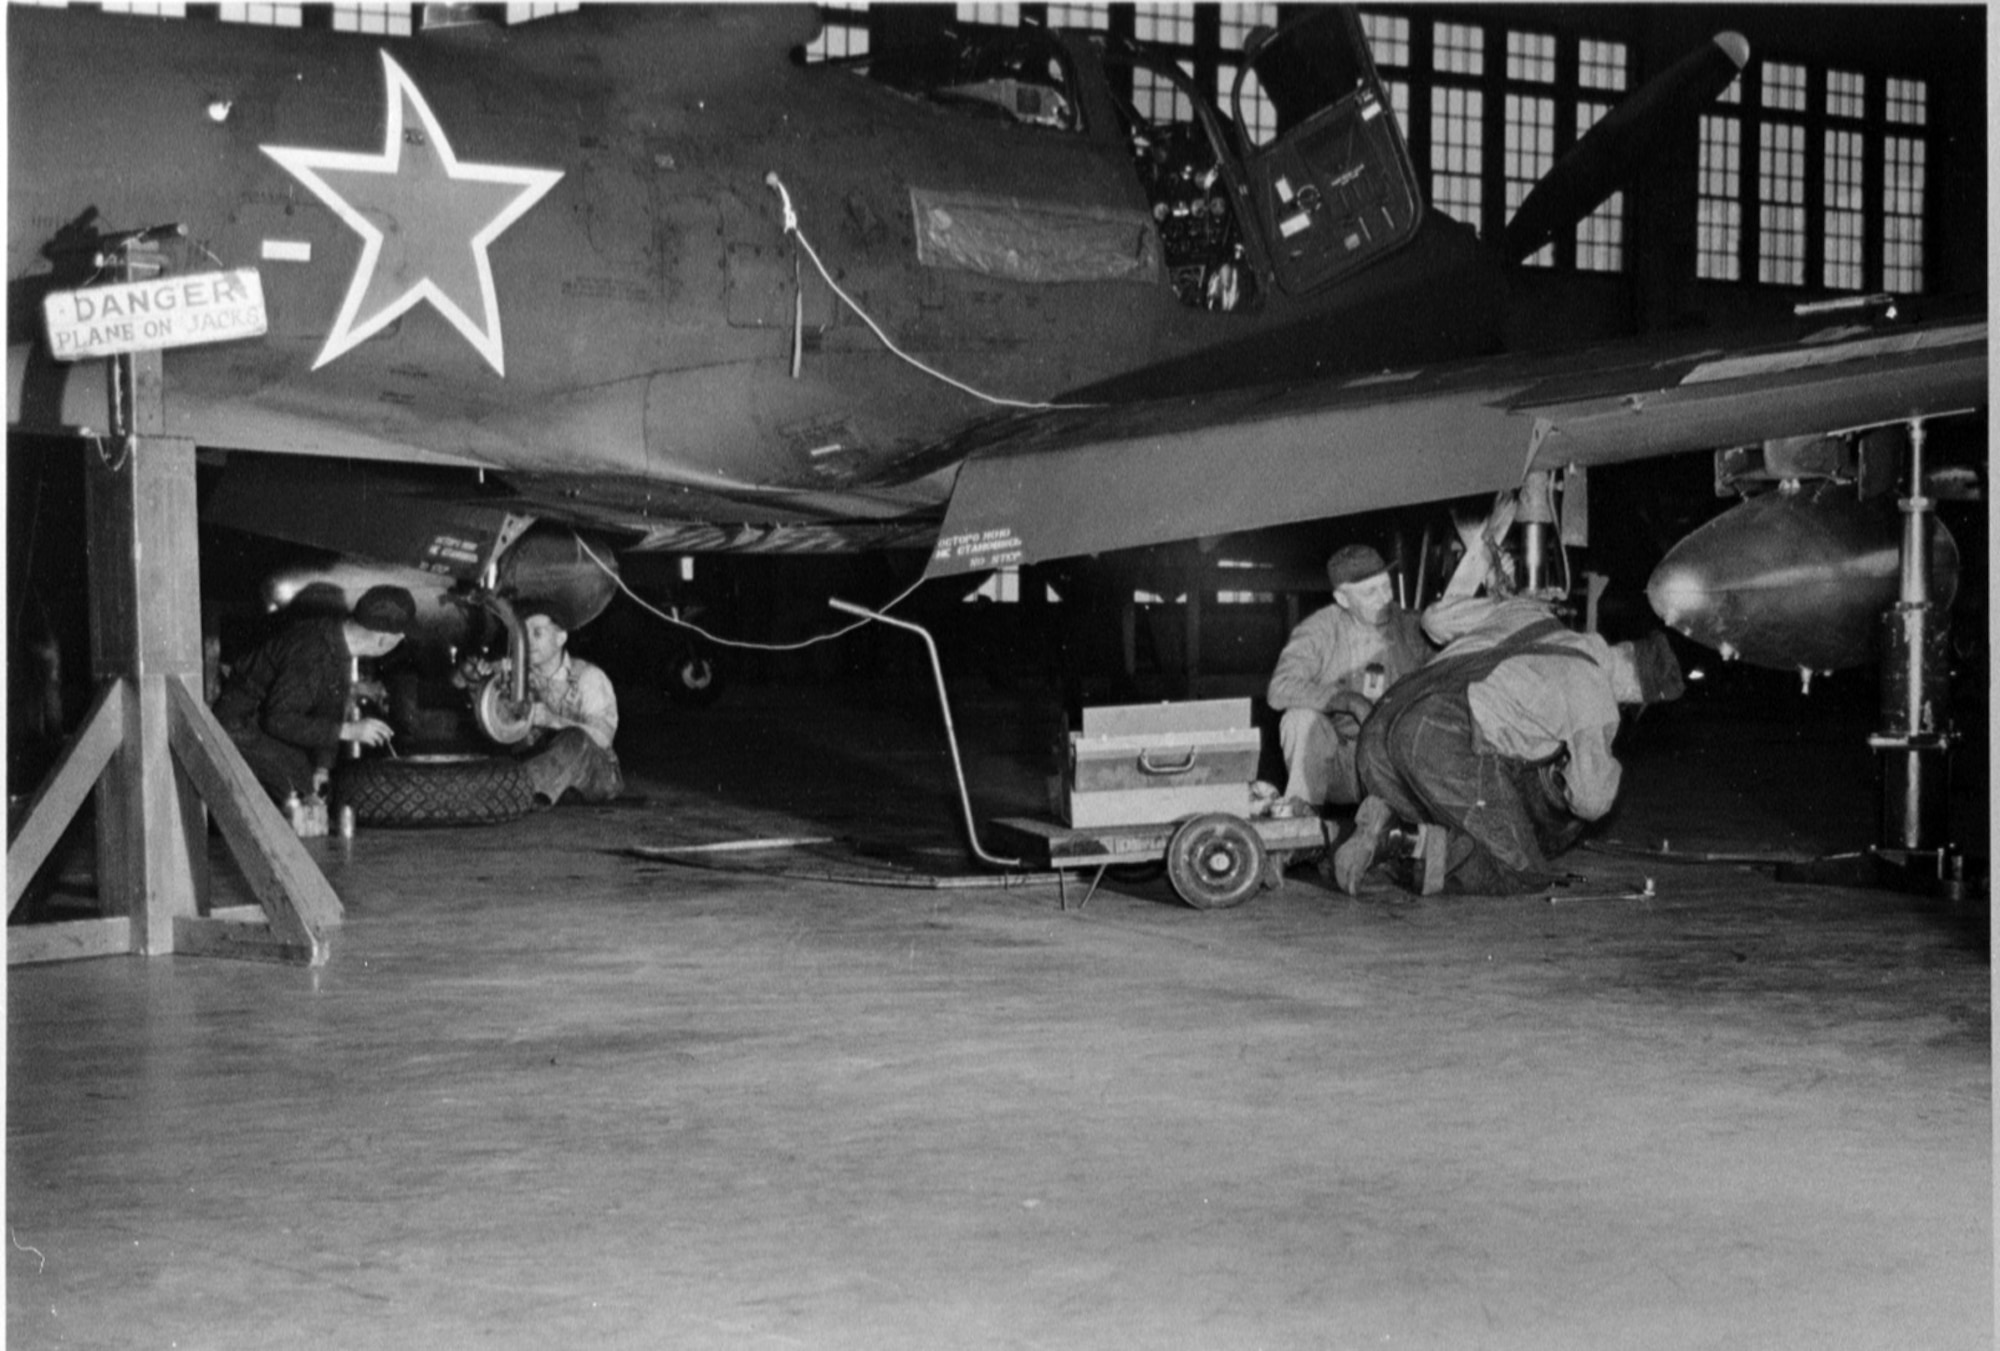 A processed P-63 Kingcobra undergoes a tire and brake inspection in the final processing hanger at Great Falls Army Air Base June 1945 during the Lend-Lease Program. (photo courtesy of the Malmstrom Museum)